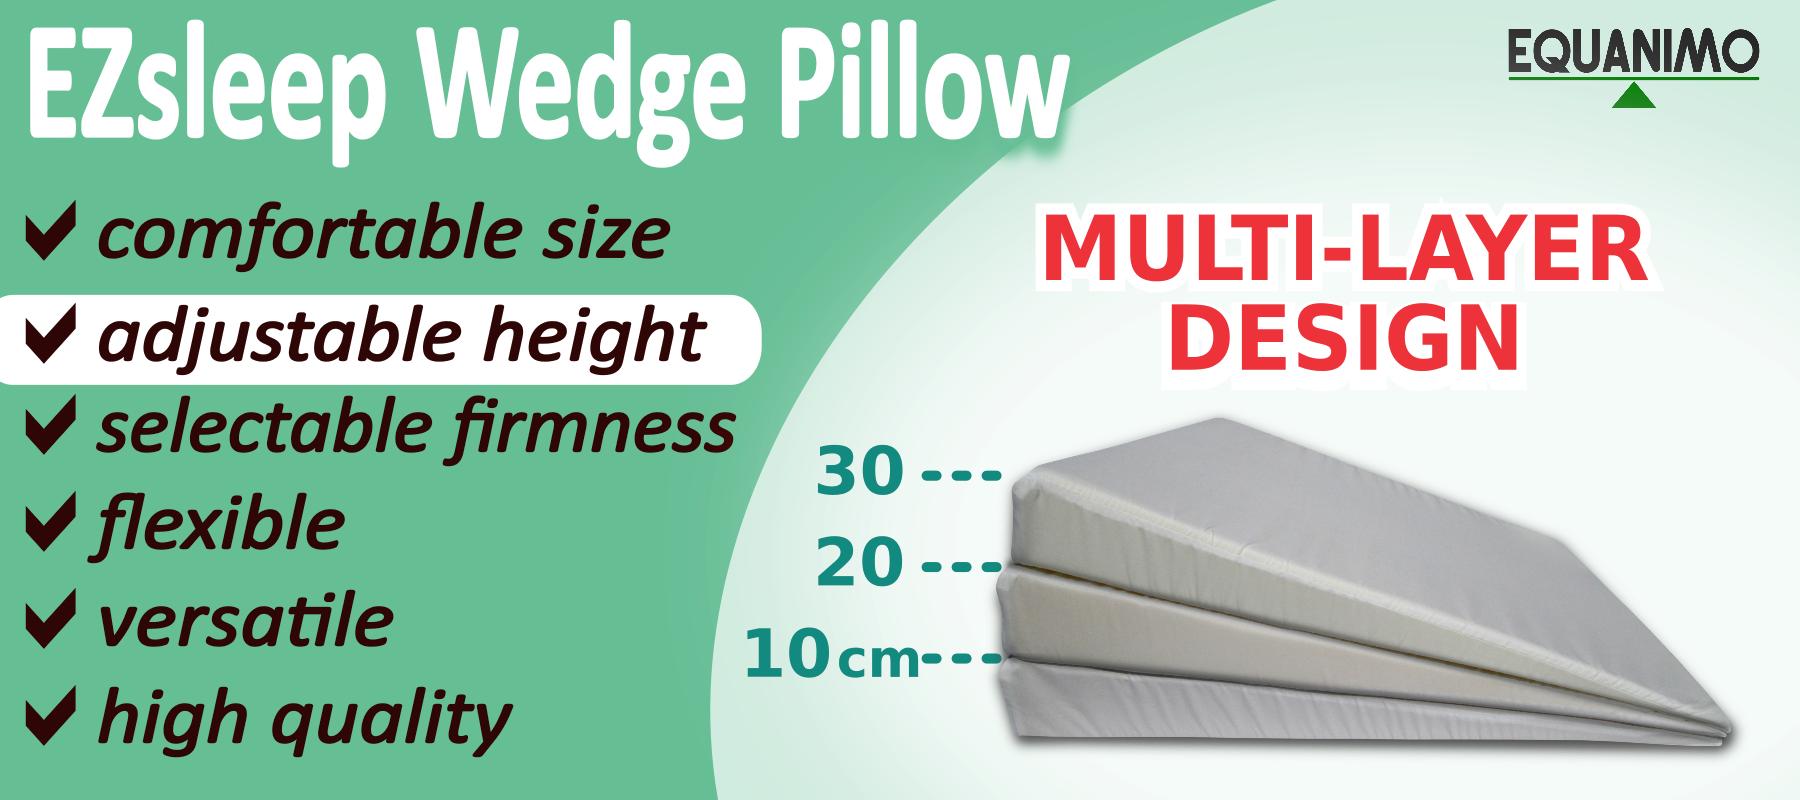 EZsleep Wedge Pillow comes in a multi-layer design making it possible to easily adjust total wedge height between 30, 20, and 10cm